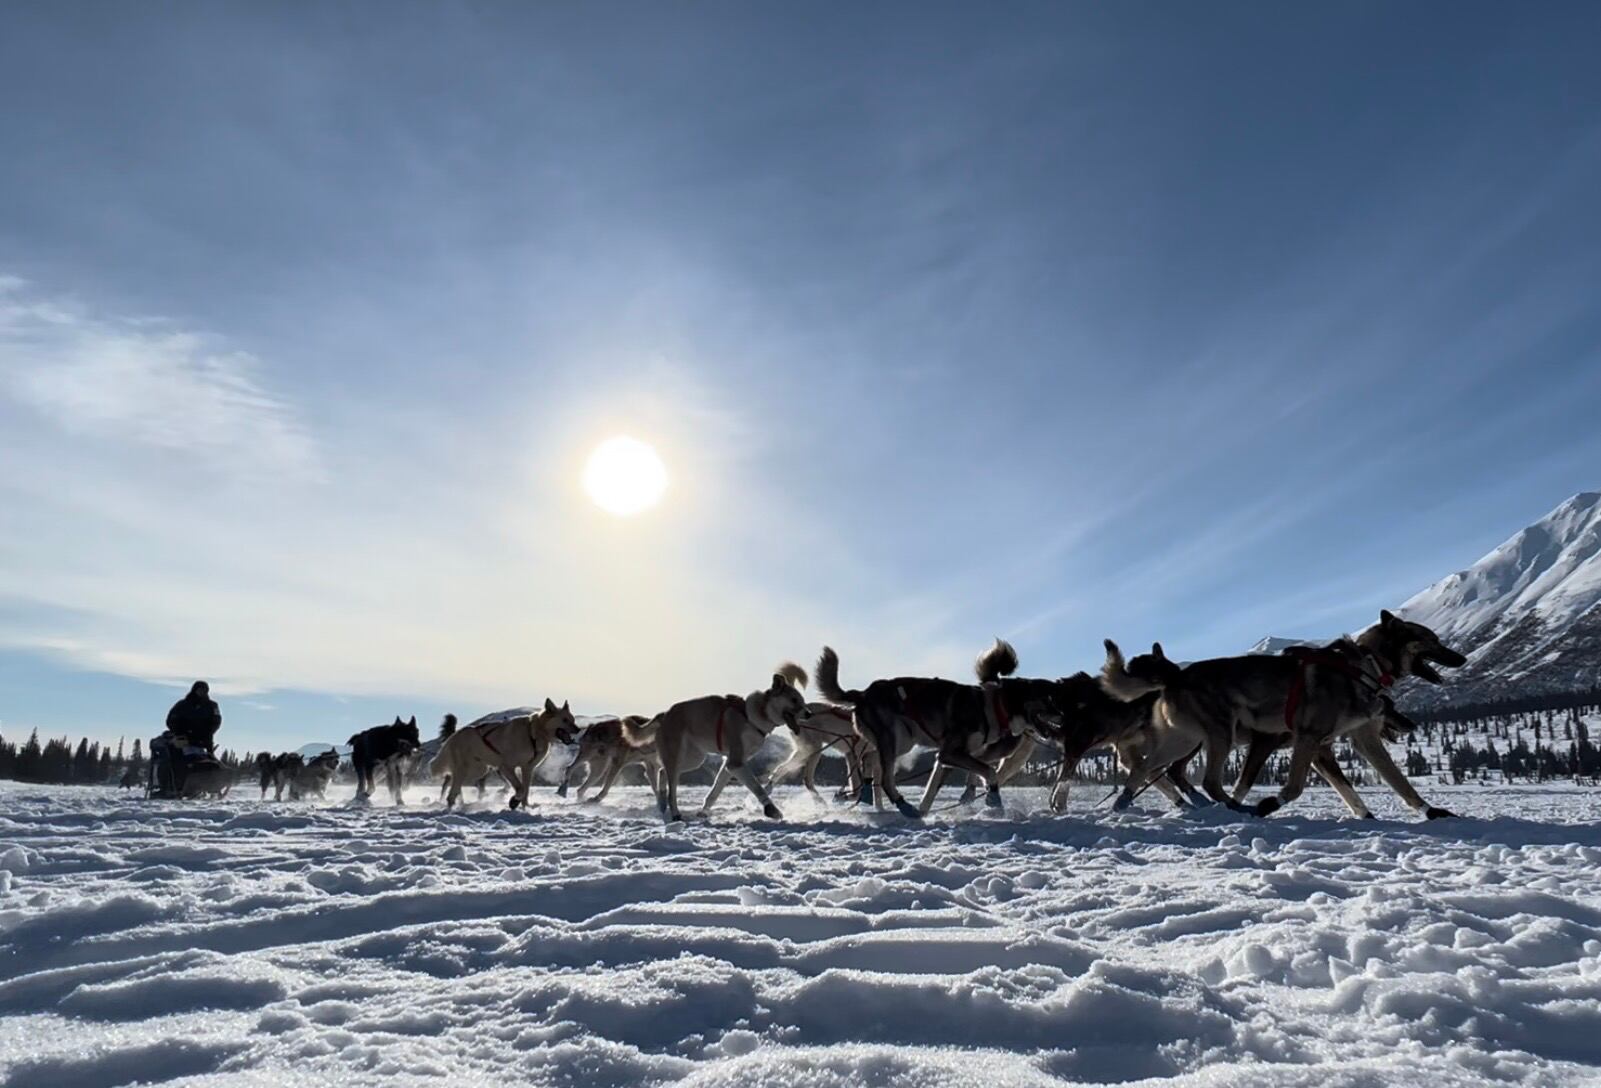 Veteran musher Richie Diehl, who would go on to place 3rd in the 51st running of the Iditarod,...